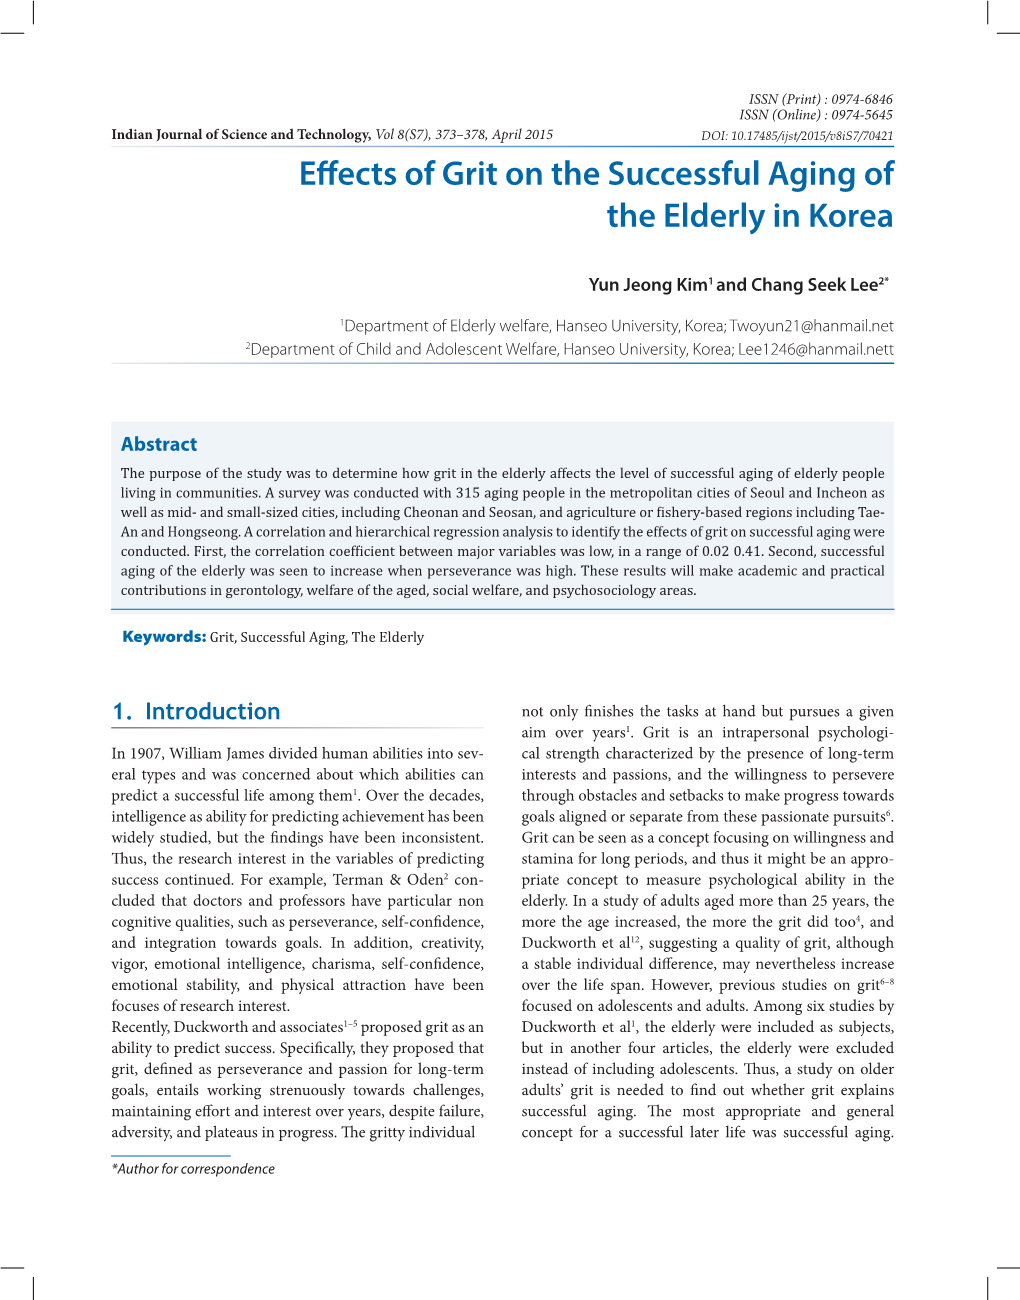 Effects of Grit on the Successful Aging of the Elderly in Korea